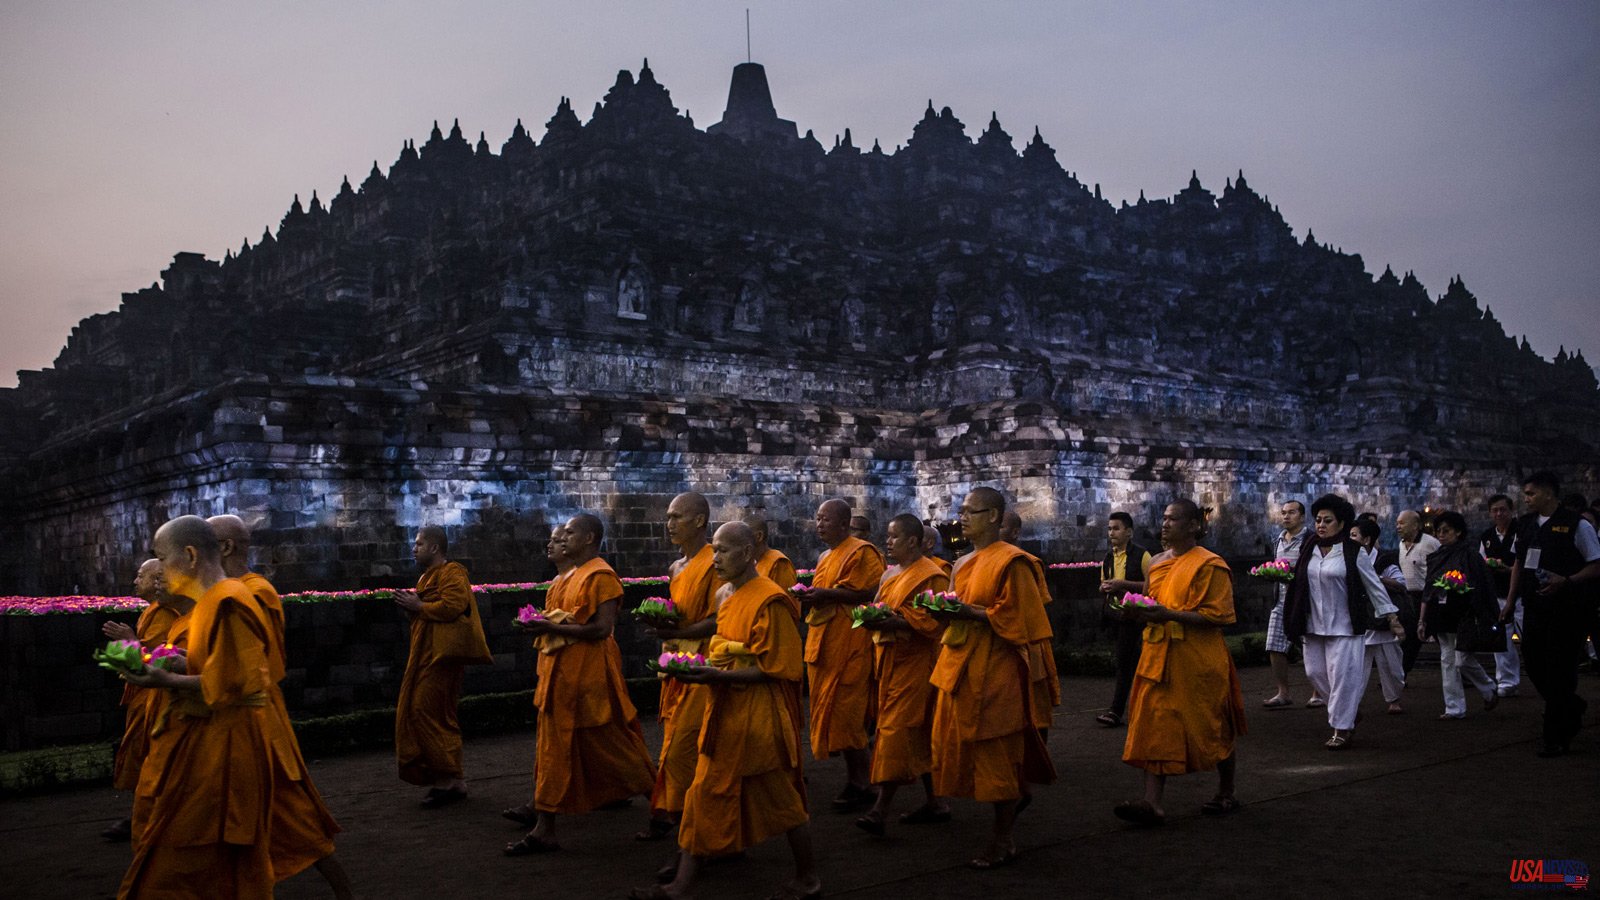 Borobudur: The largest Buddhist temple in the world to go more expensive